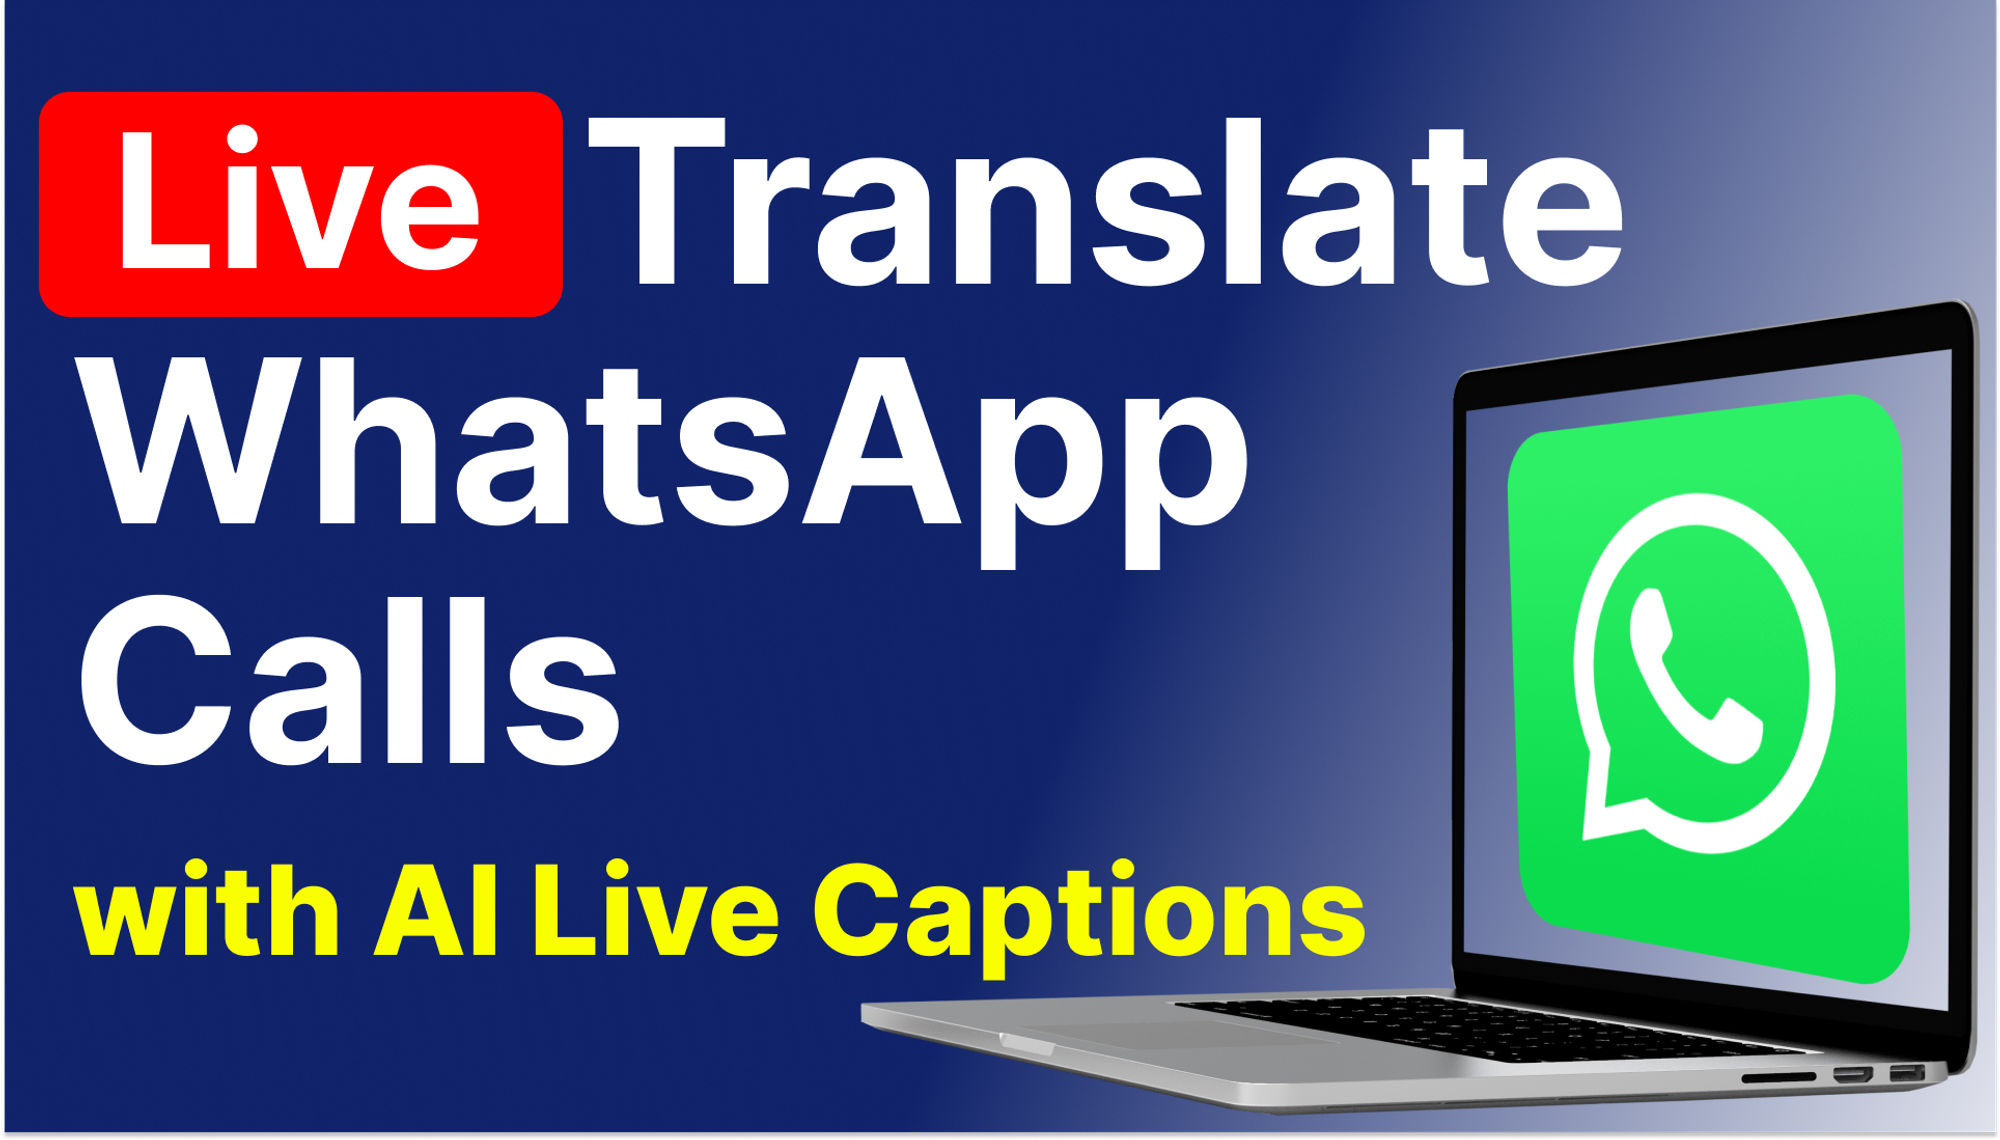 If you are in a WhatsApp call and cannot understand the person you are talking to, I am here for you! In this post, you’ll learn 5 easy steps to translate WhatsApp calls in real time with AI-powered live captions in your own language